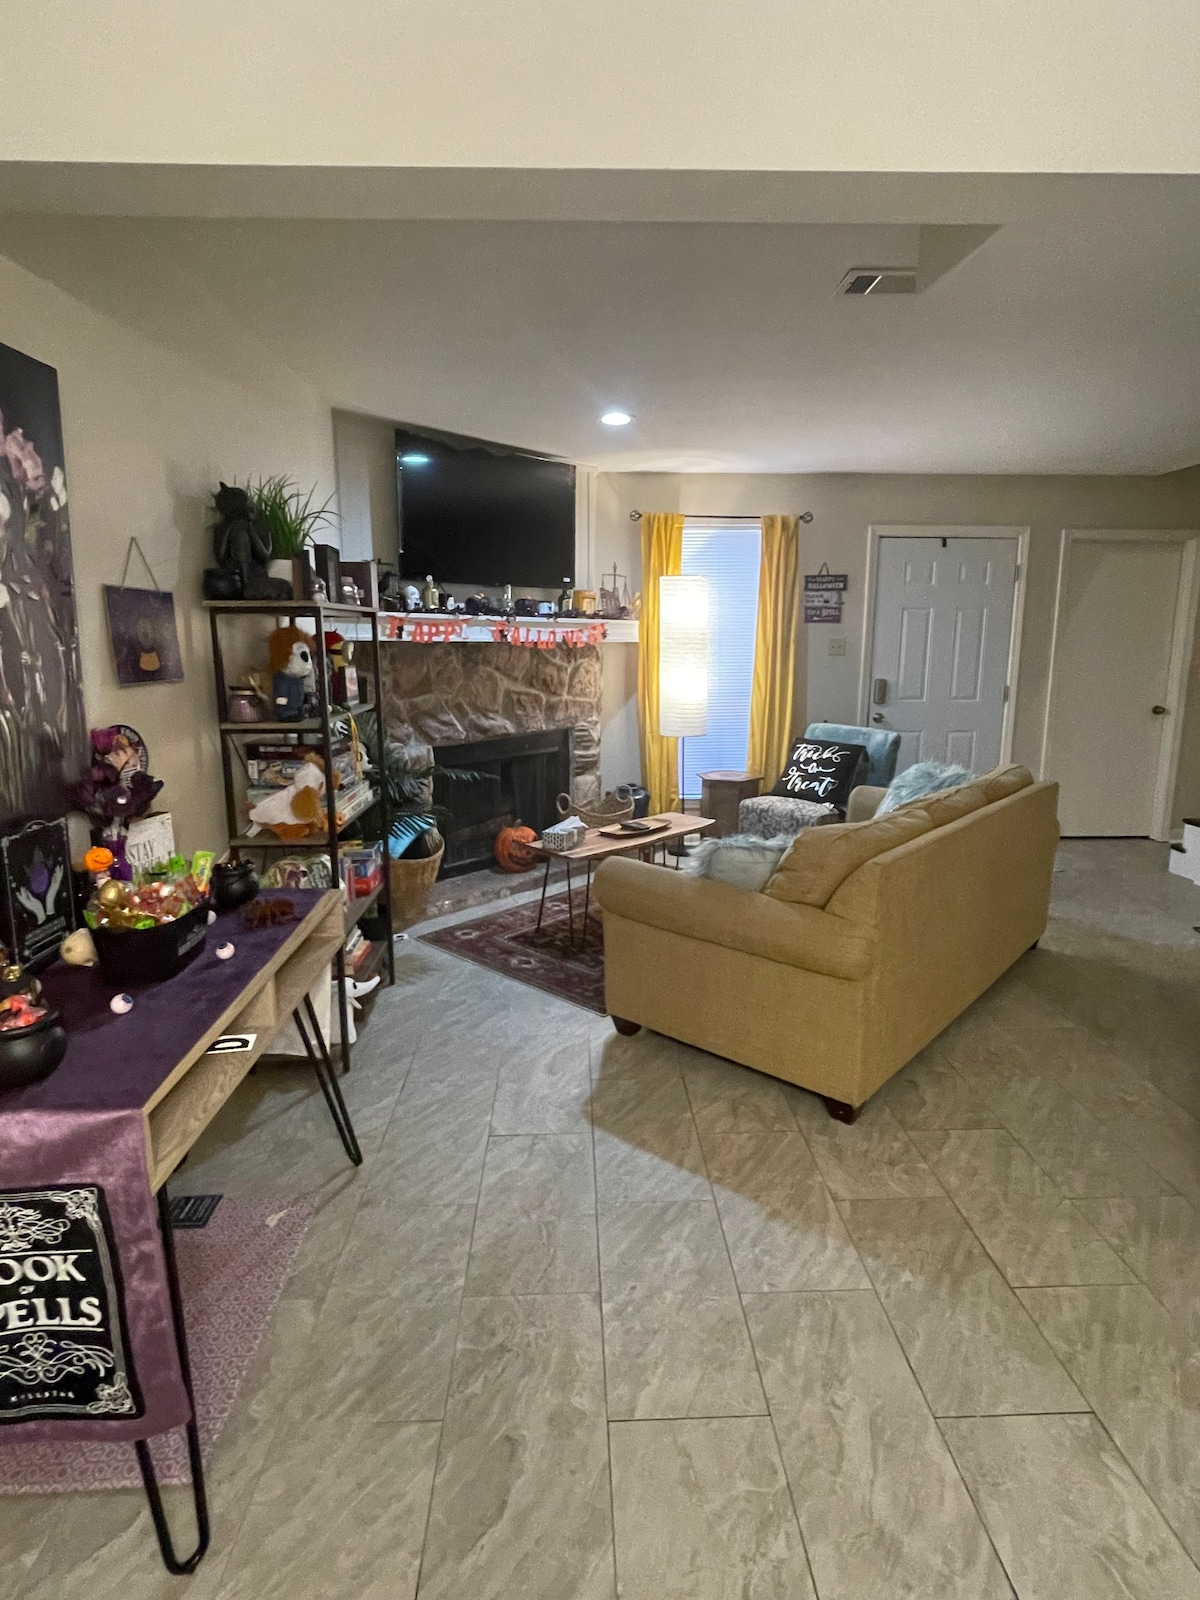 Lovely 2BR condo close to Women’s Hospital